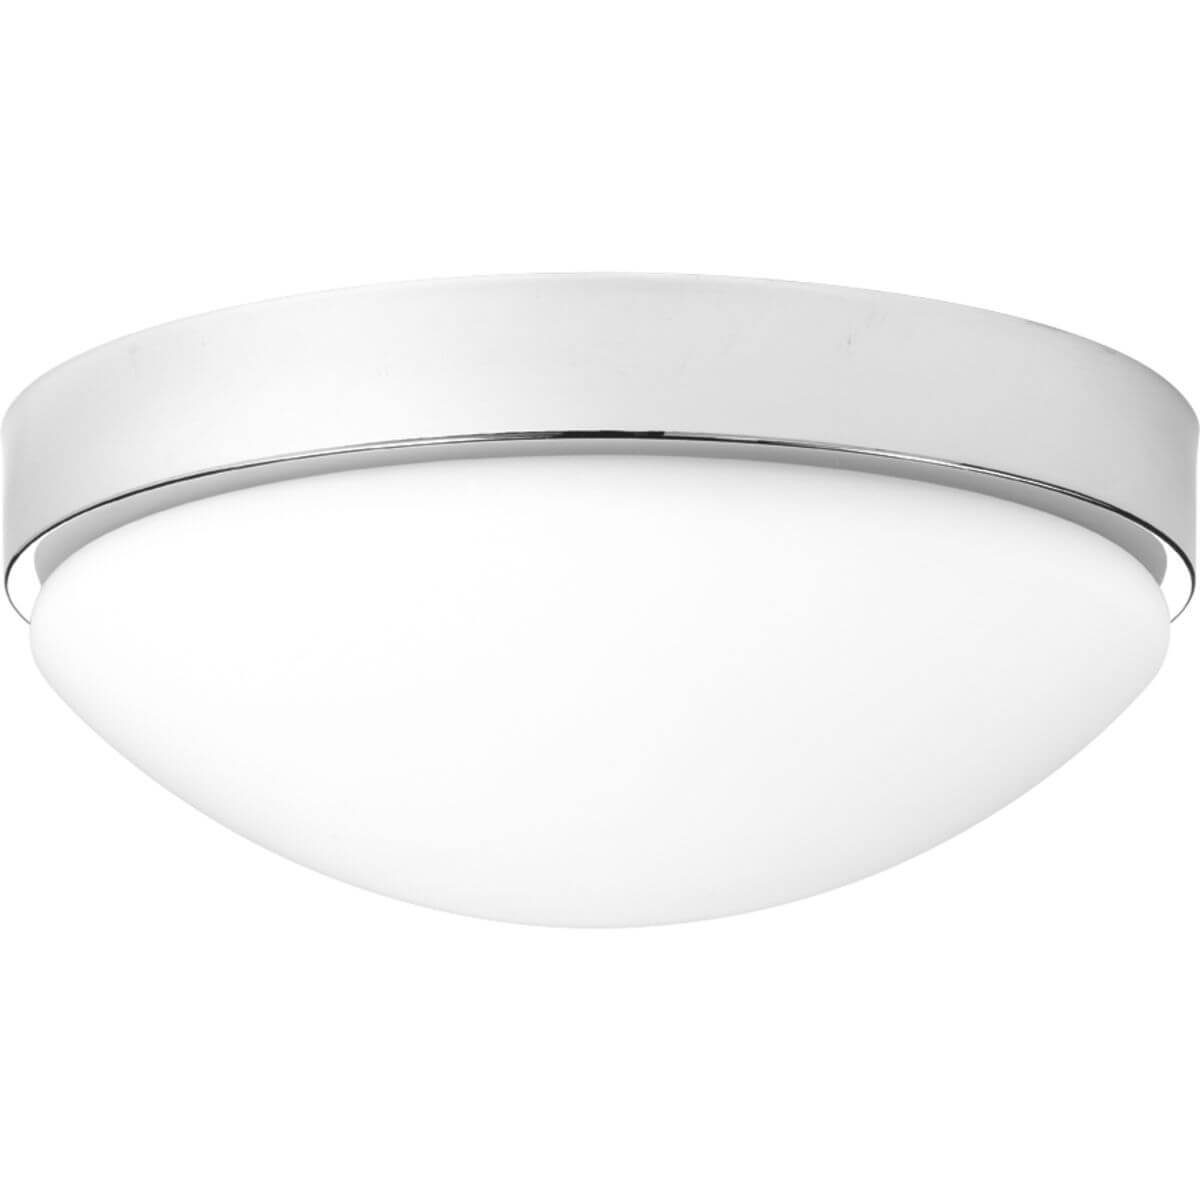 Progress Lighting Elevate 1 Light 13 inch LED Flush Mount in Polished Chrome with White Glass P350105-015-30